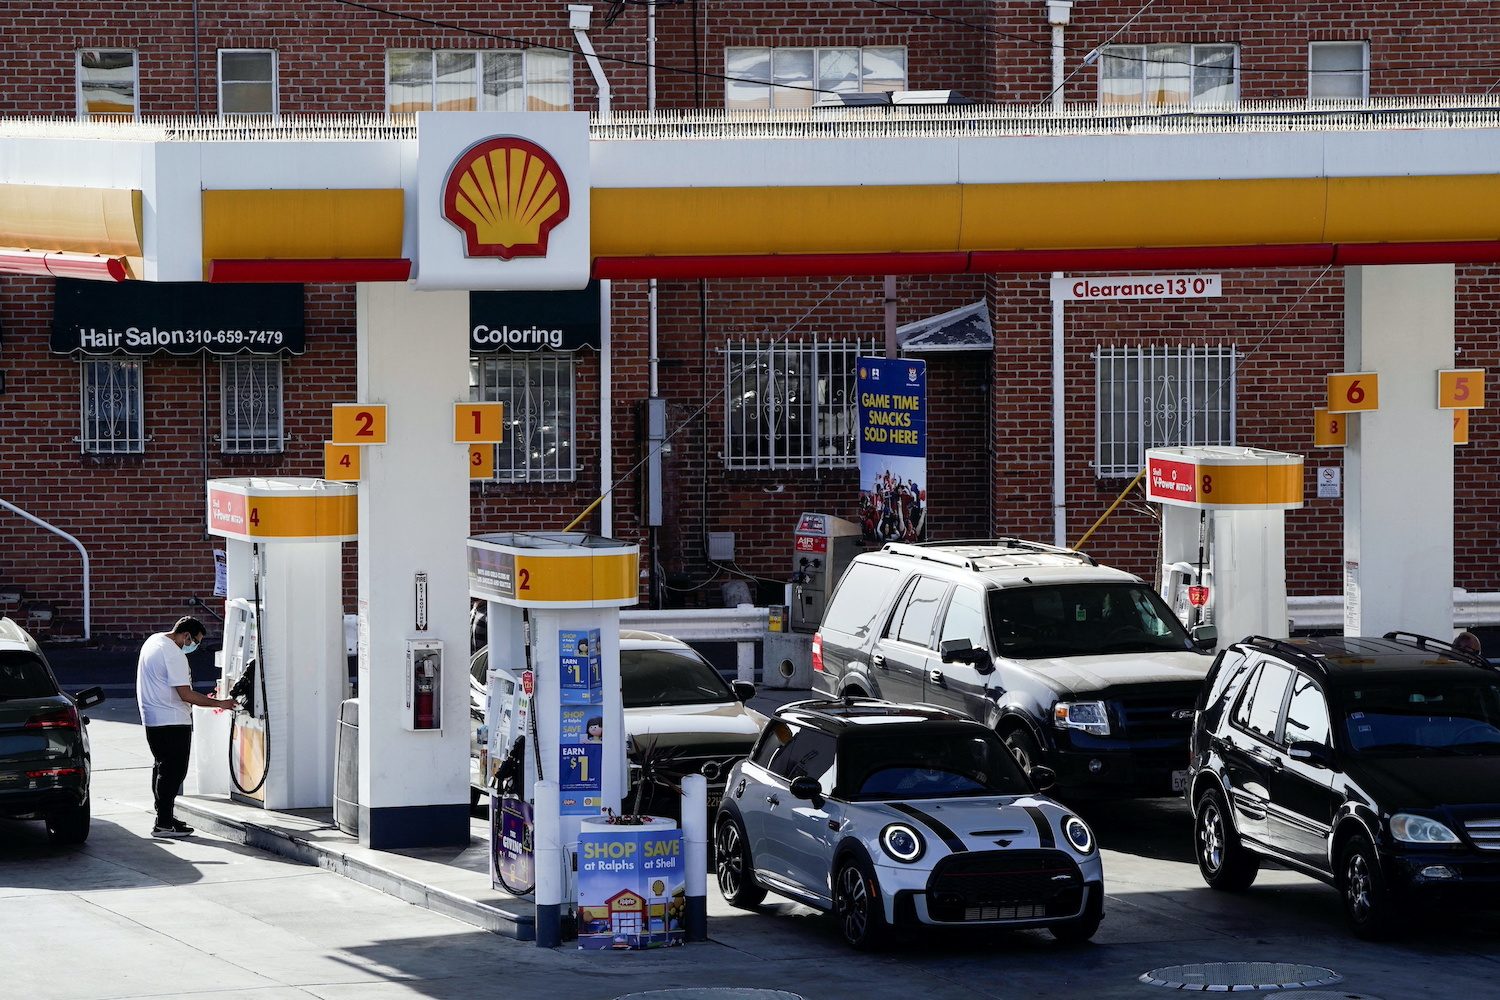 Higher gasoline prices flatter US retail sales; consumers remain resilient